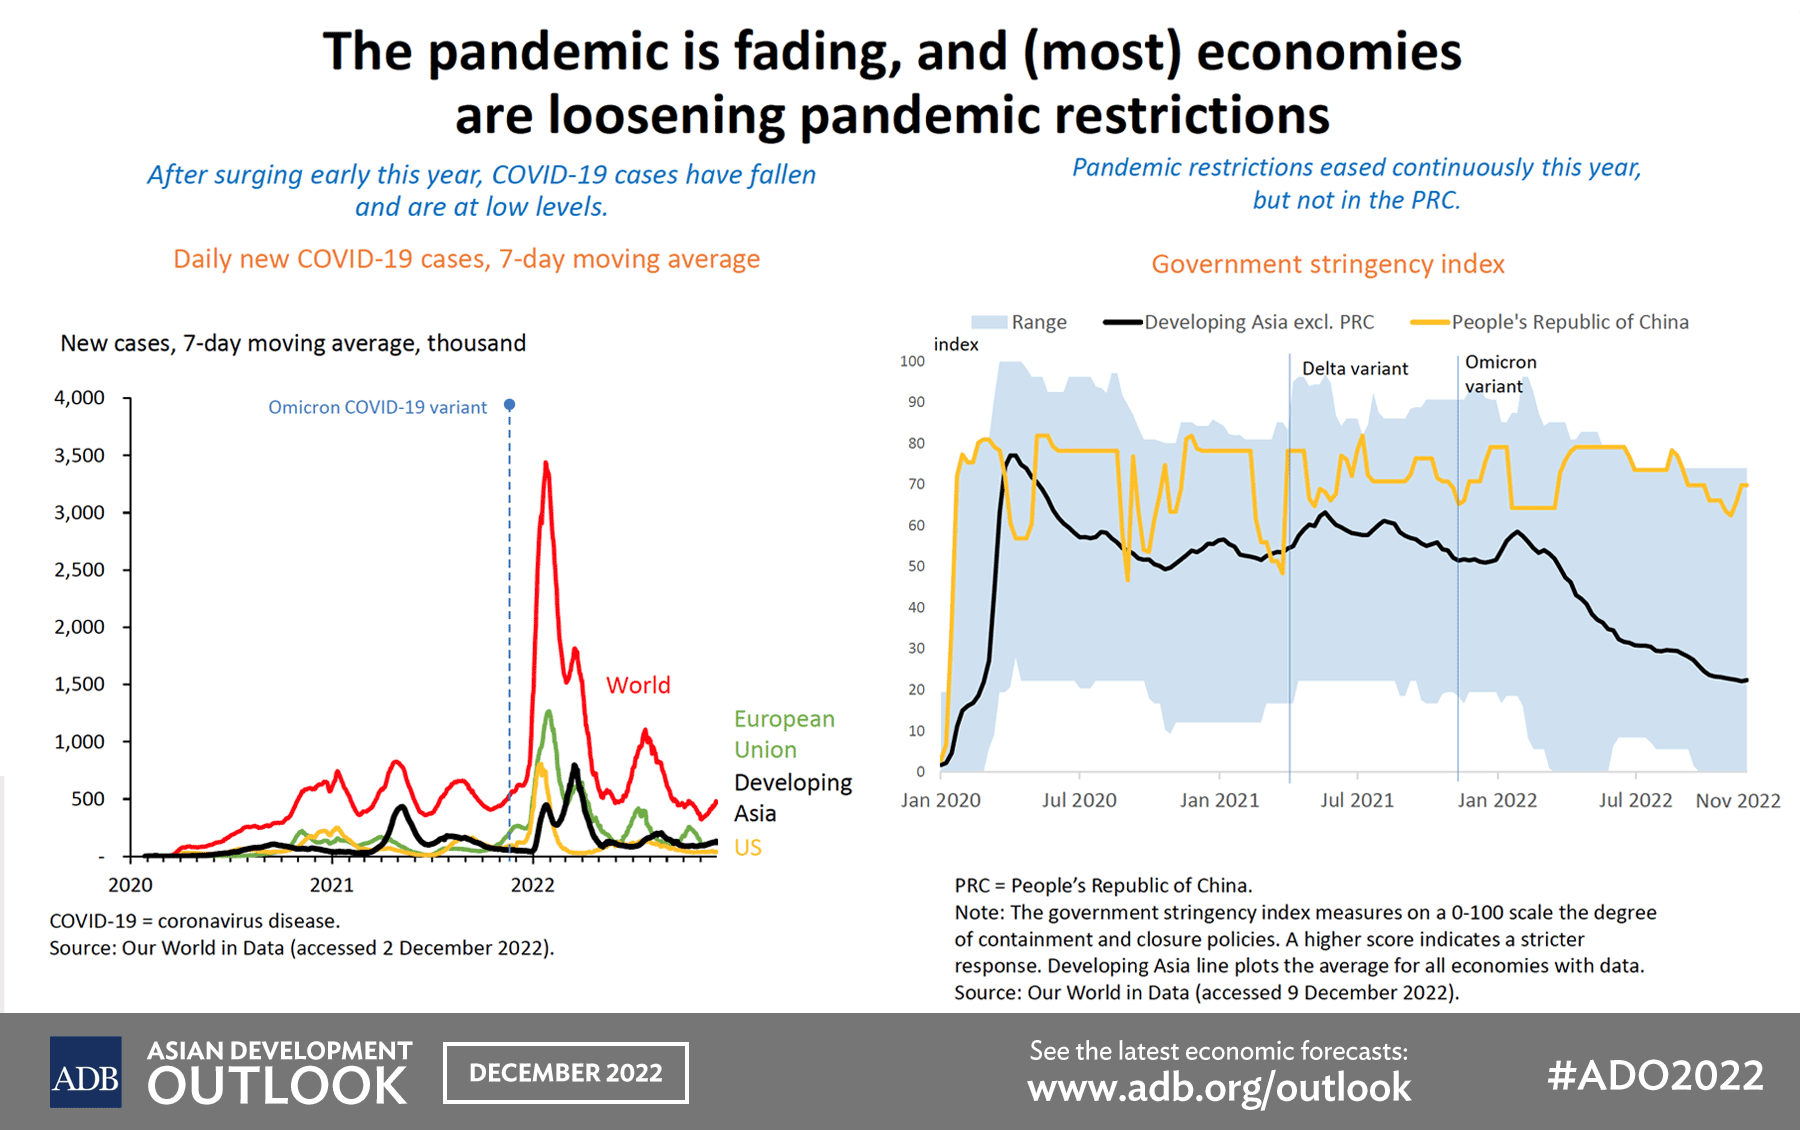 The pandemic is fading, and (most) economies are loosening pandemic restrictions